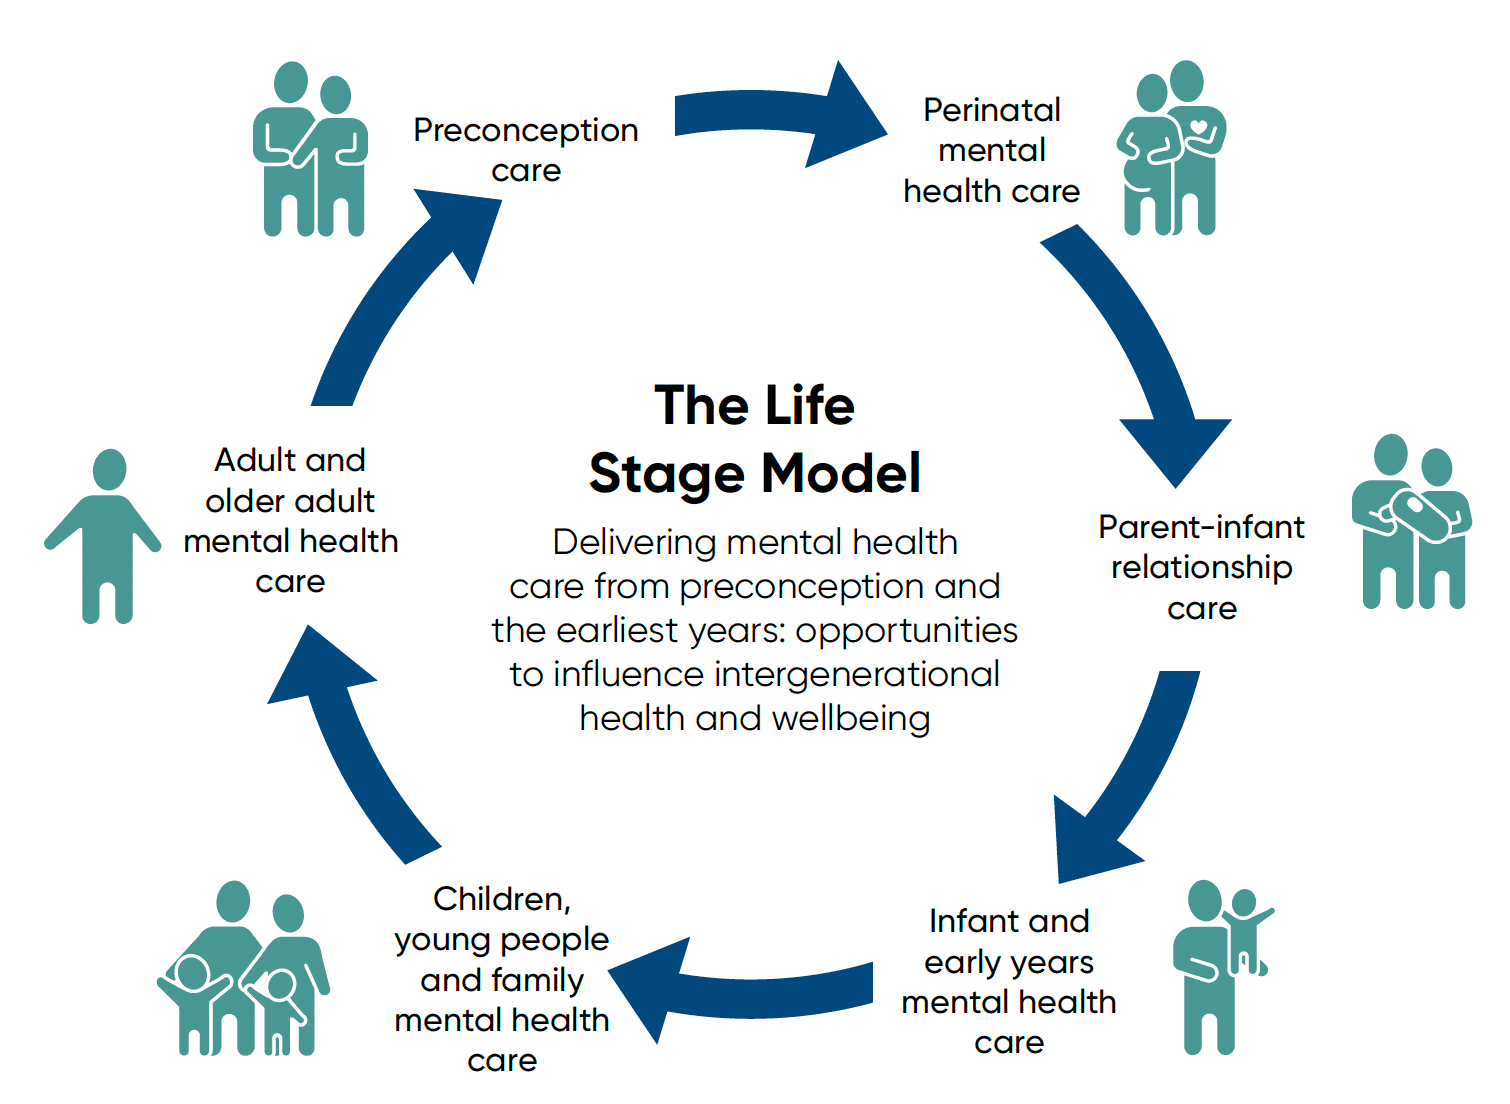 Life Stage Model – Model showing the cycle of mental health care from preconception to infant and childhood to adulthood